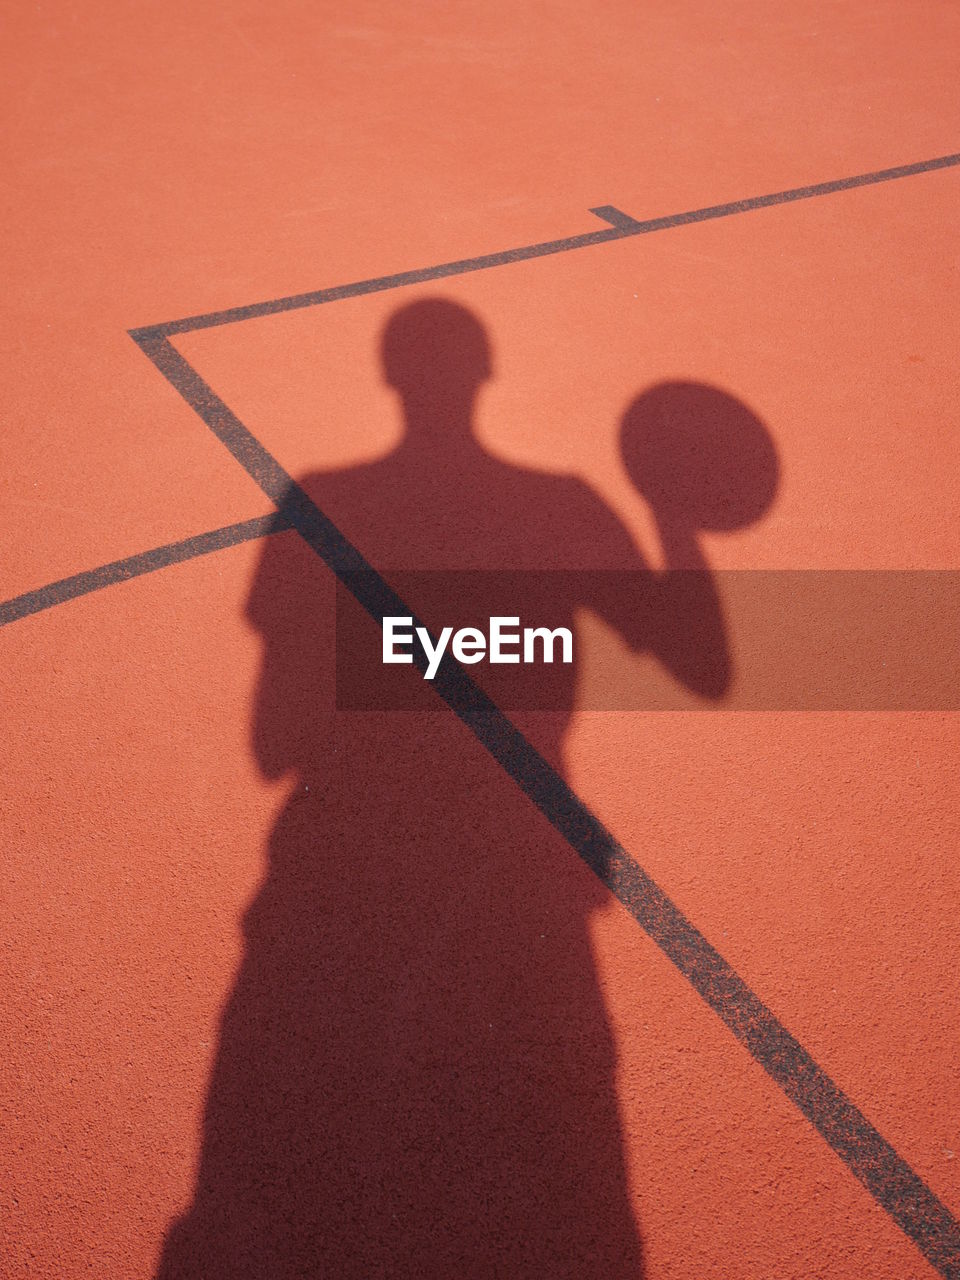 Shadow of player on basket ball court